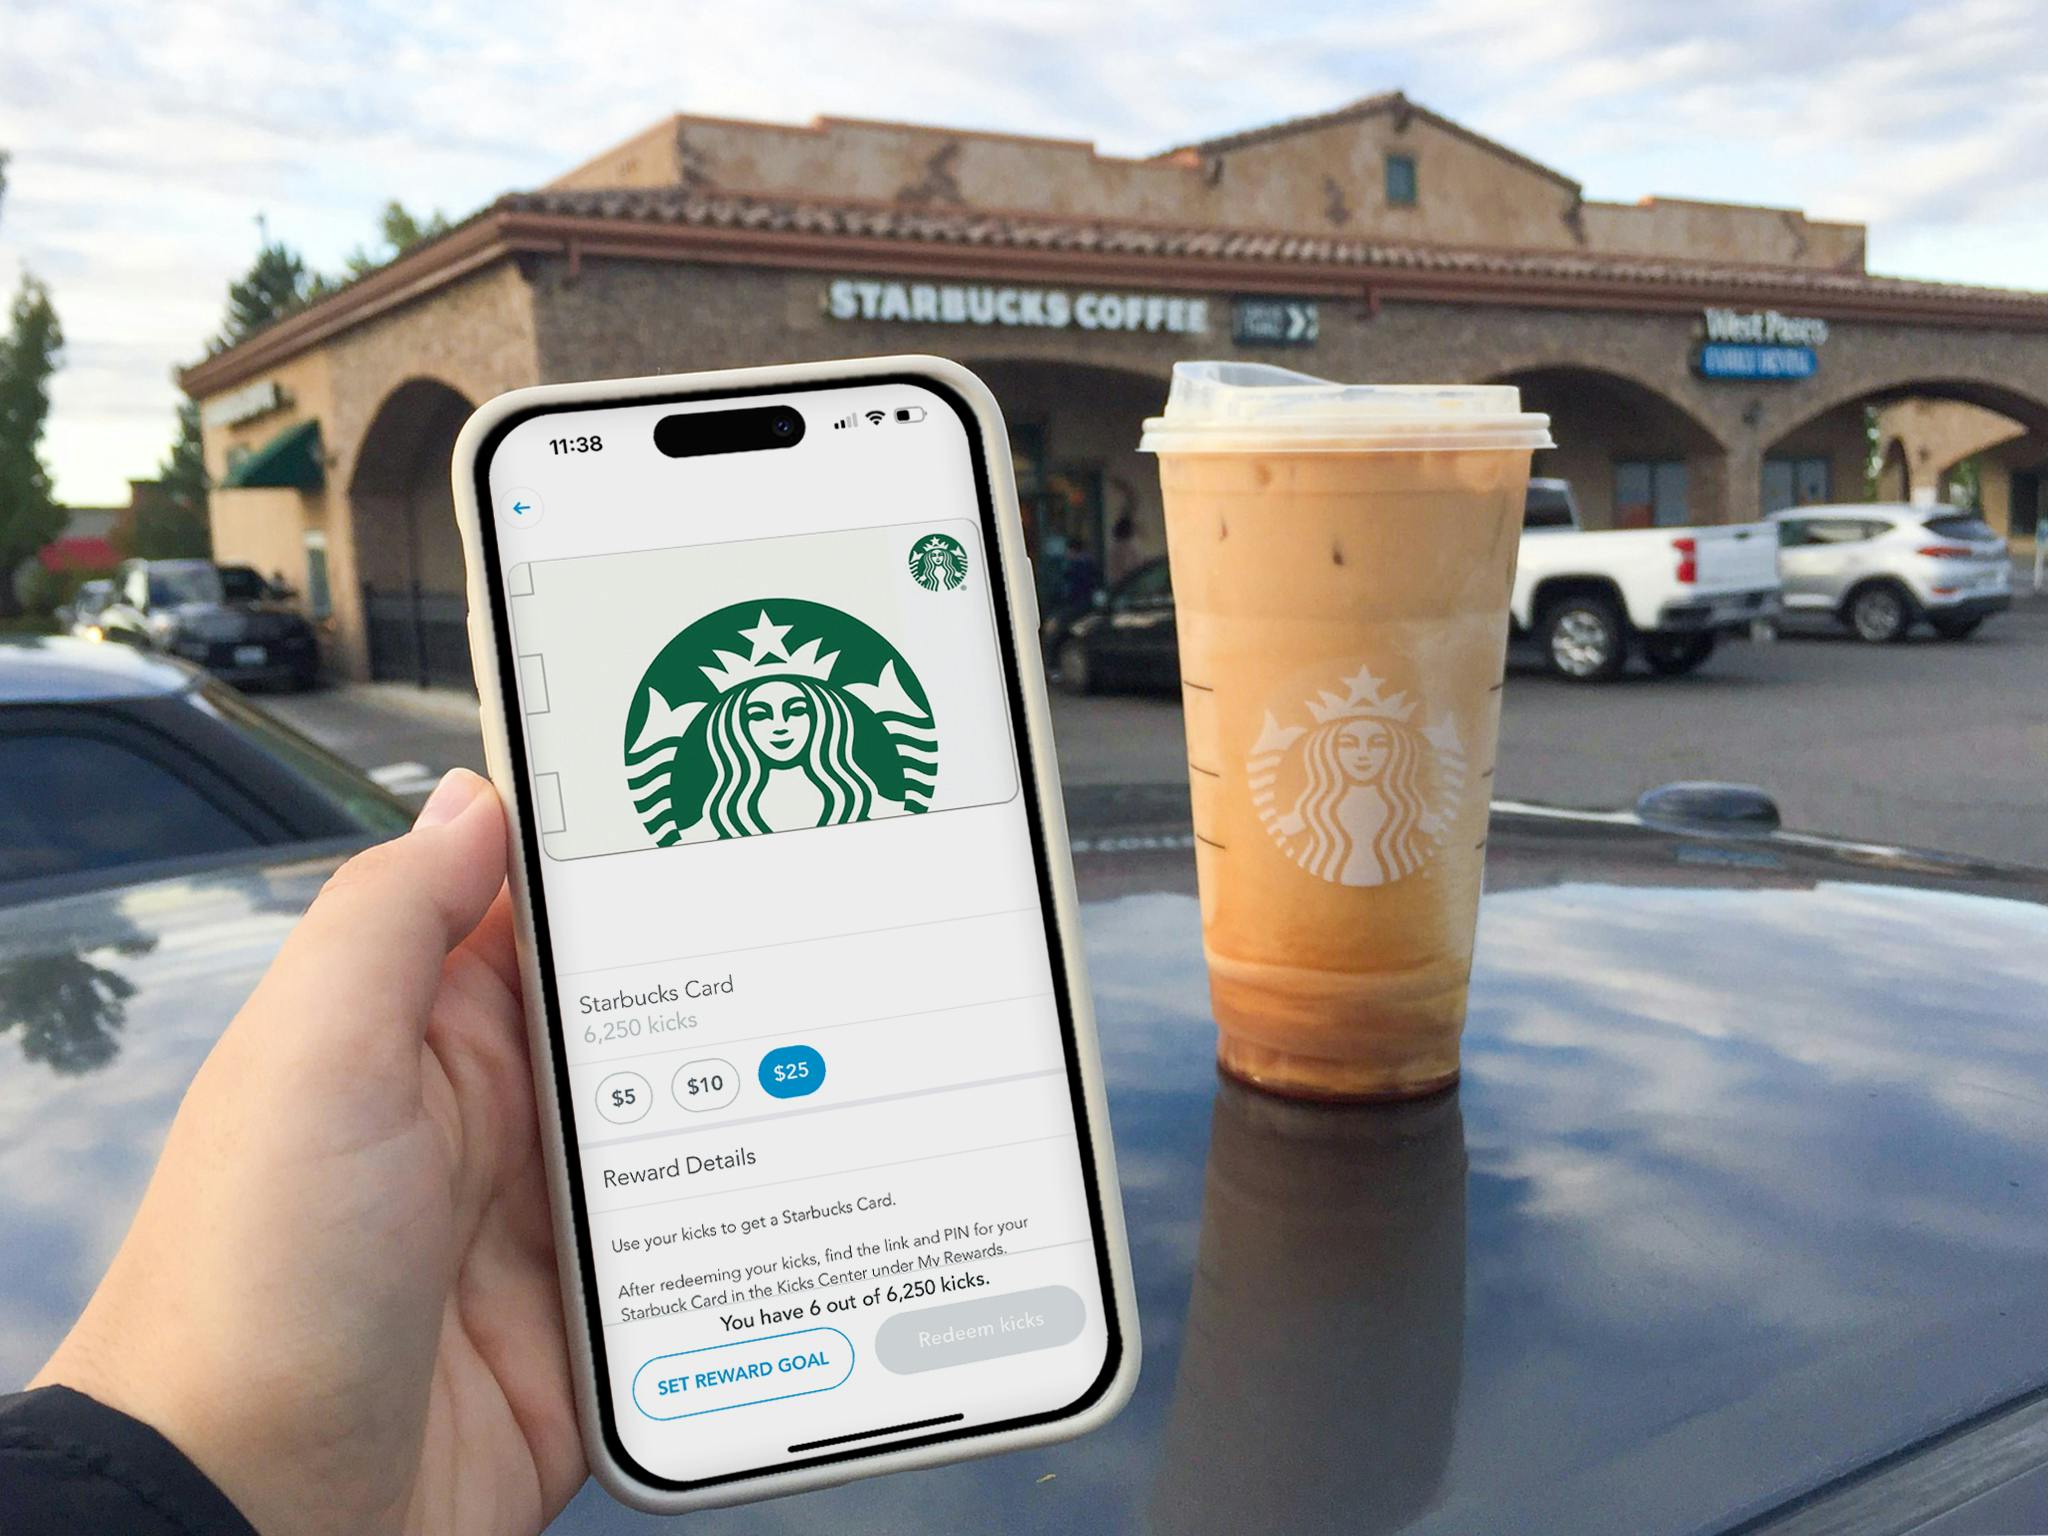 Someone holding a phone displaying a Shopkick Strabucks gift card reward in front of a Starbucks coffee and store